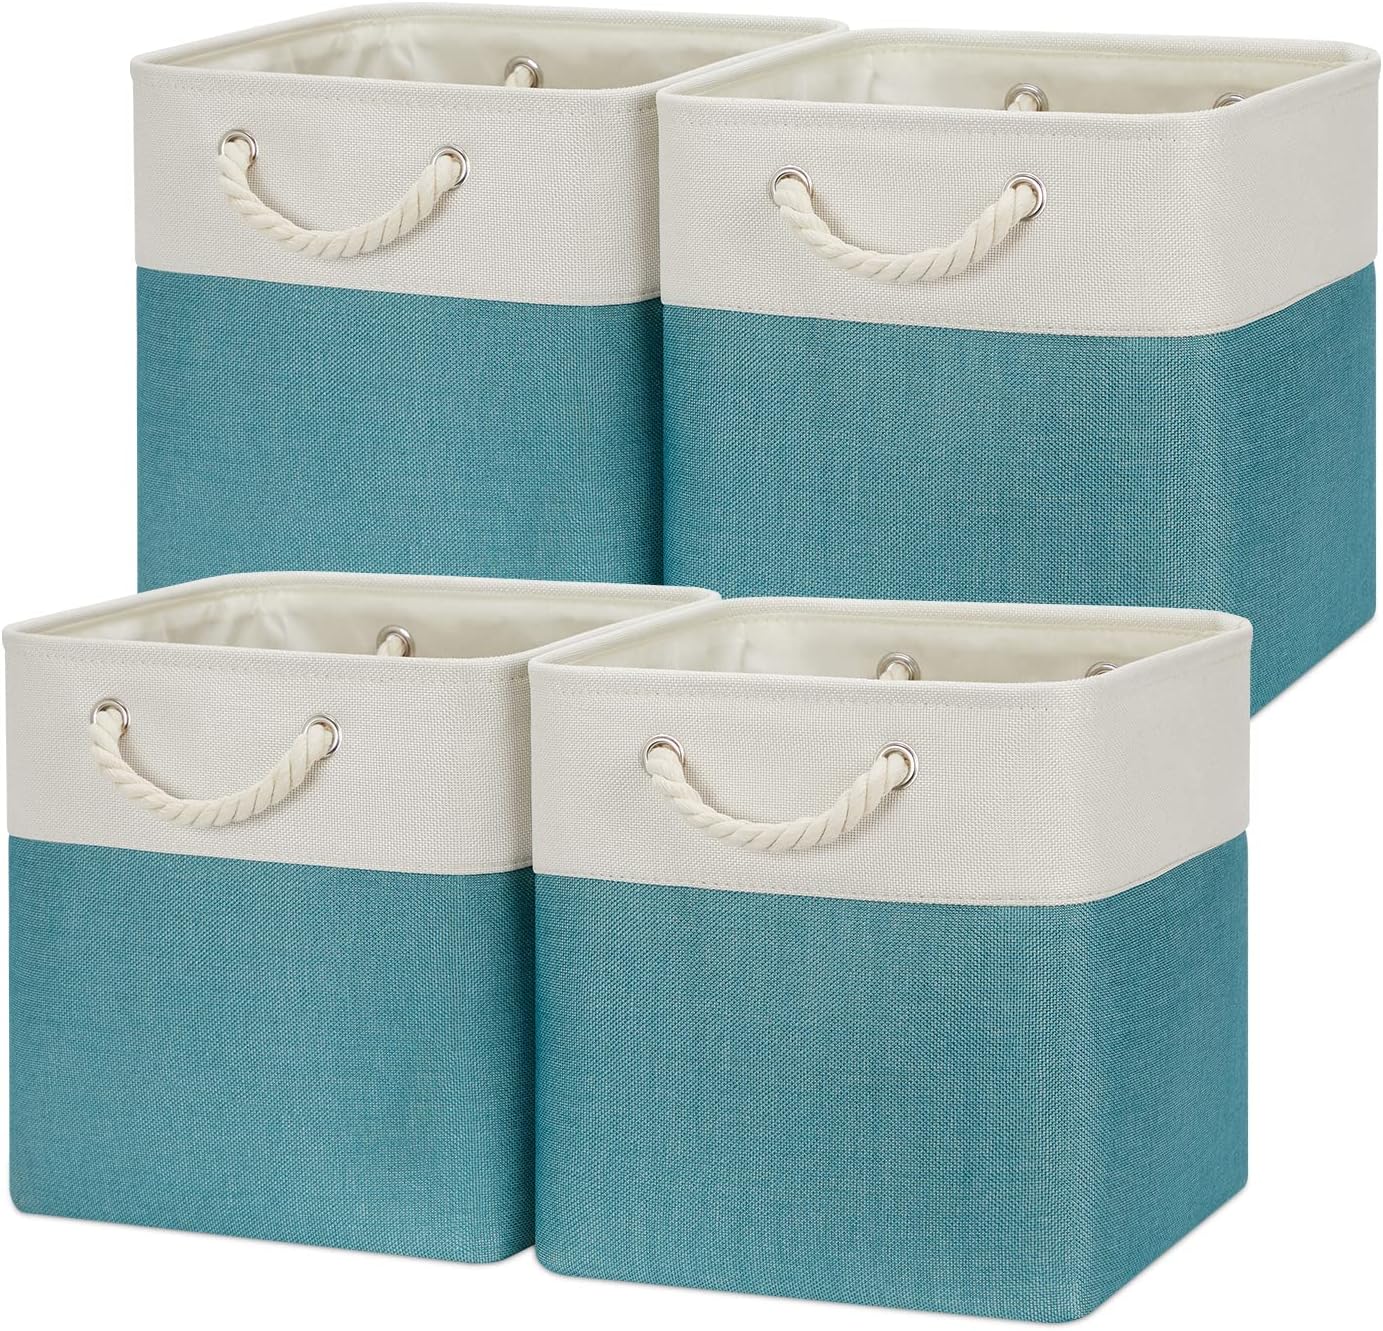 Temary Cubes Storage Baskets 12 Inch Cube Storage Bins for Shelf, Fabric Storage Cubes for Gift Empty Toy Baskets for Kids, Collapsable Box Baskets for Storage (White&Teal)